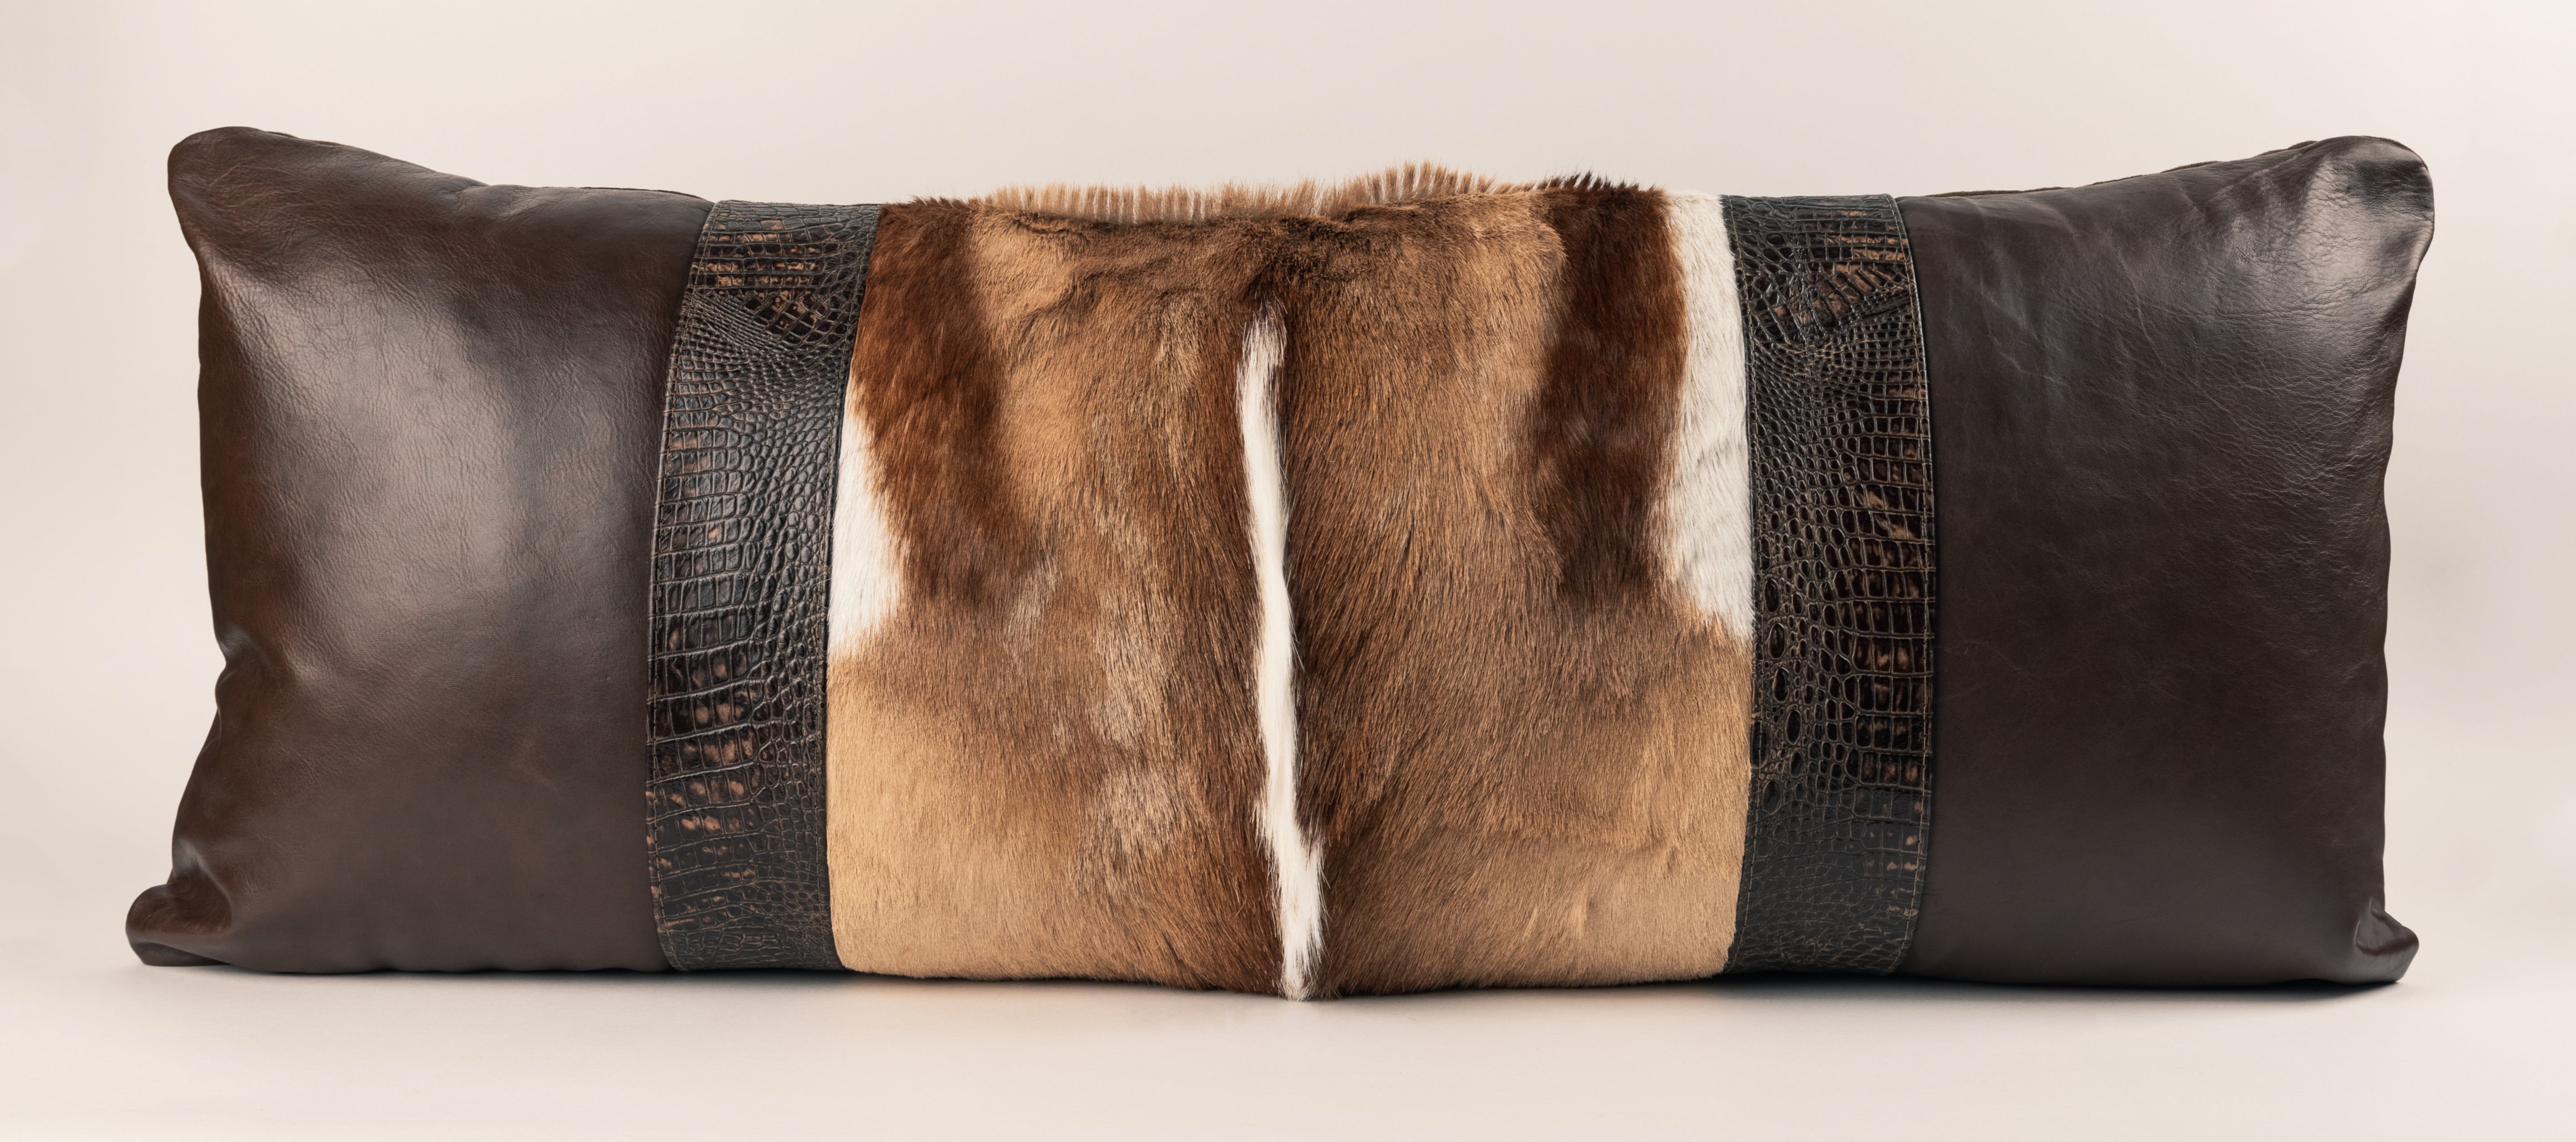 Body pillow: Springbok fur middle, Brown leather sides